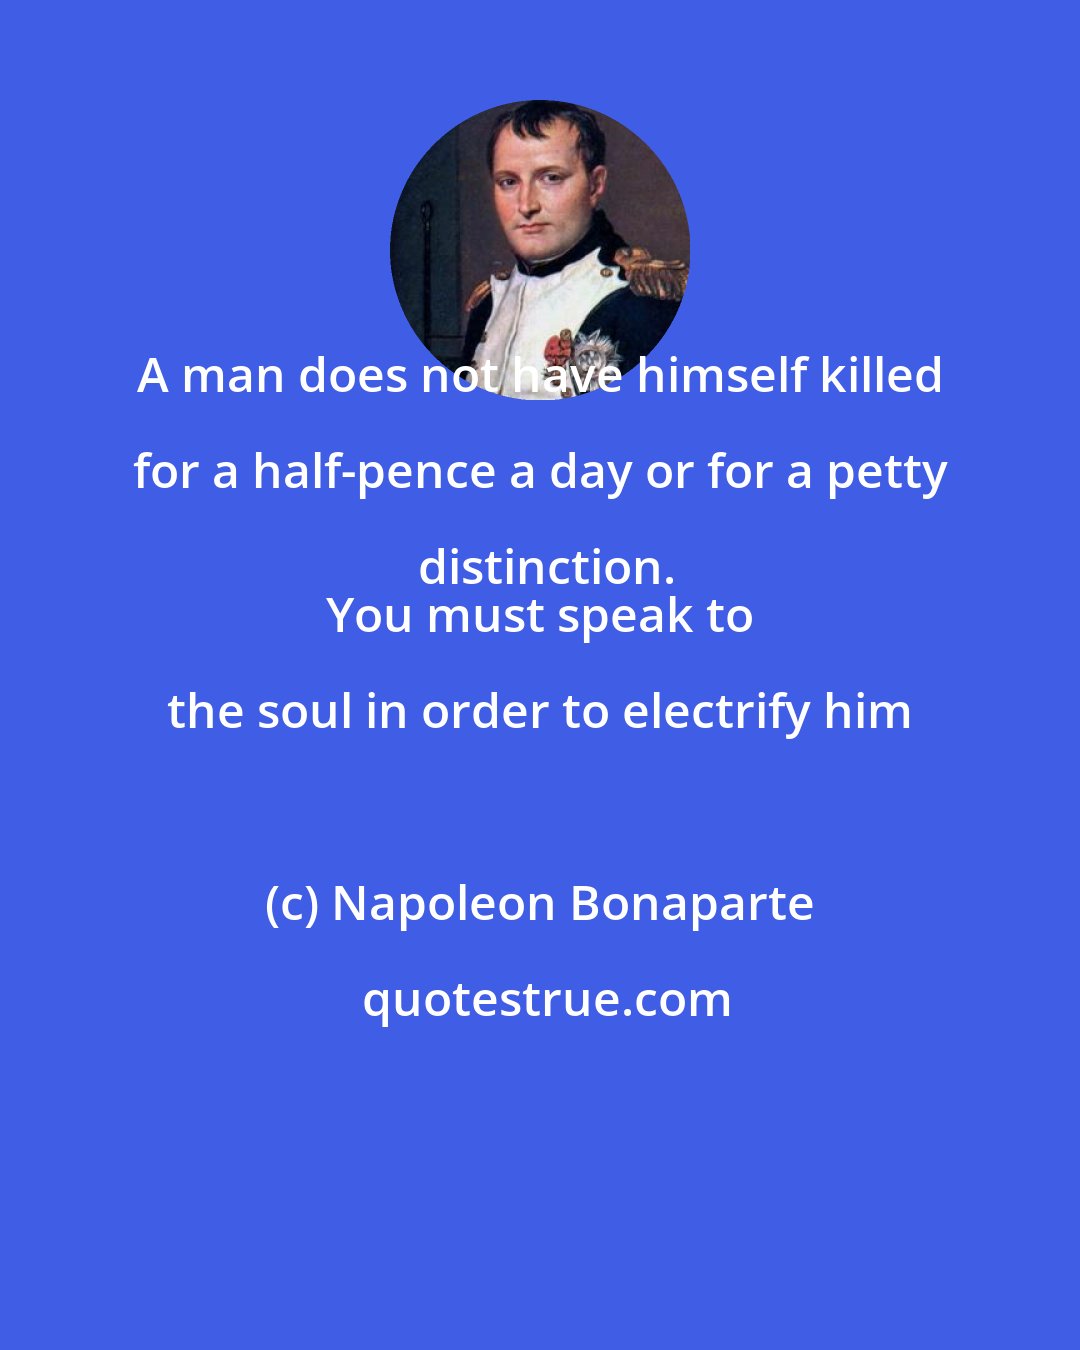 Napoleon Bonaparte: A man does not have himself killed for a half-pence a day or for a petty distinction.
 You must speak to the soul in order to electrify him